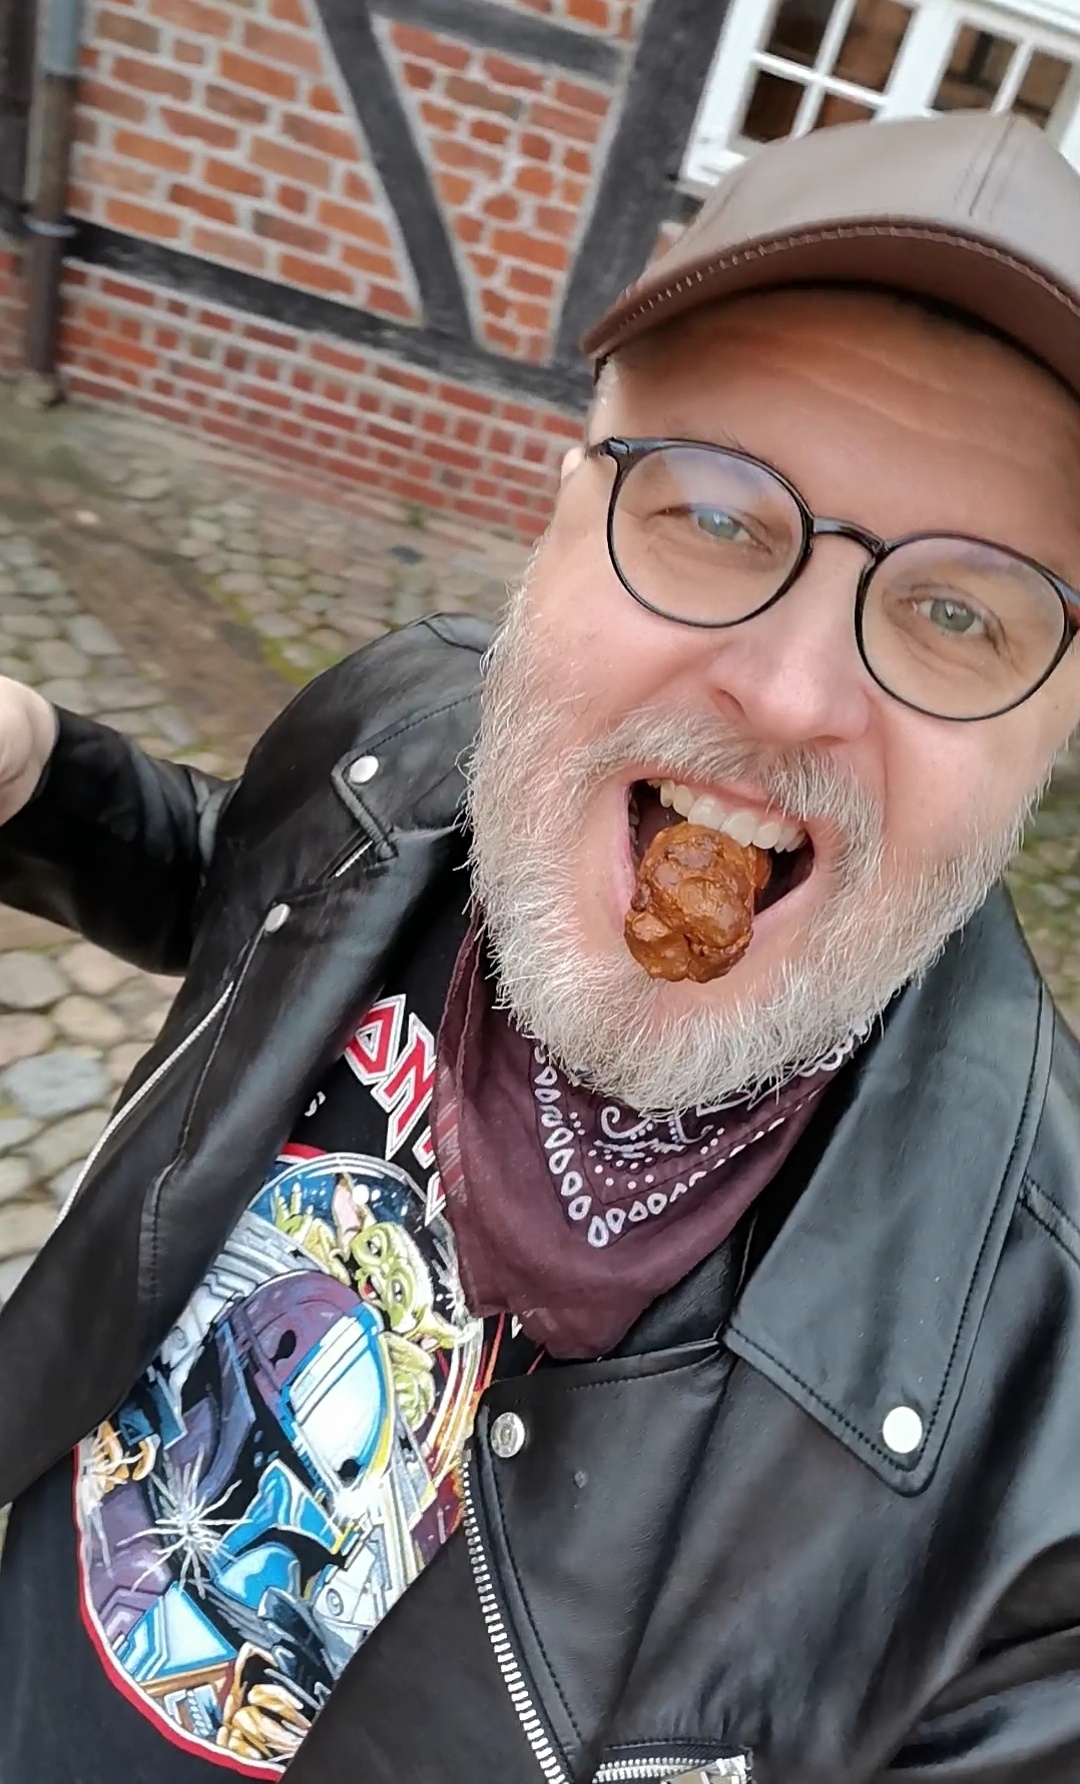 Public shit eating in full leather Pt. 1